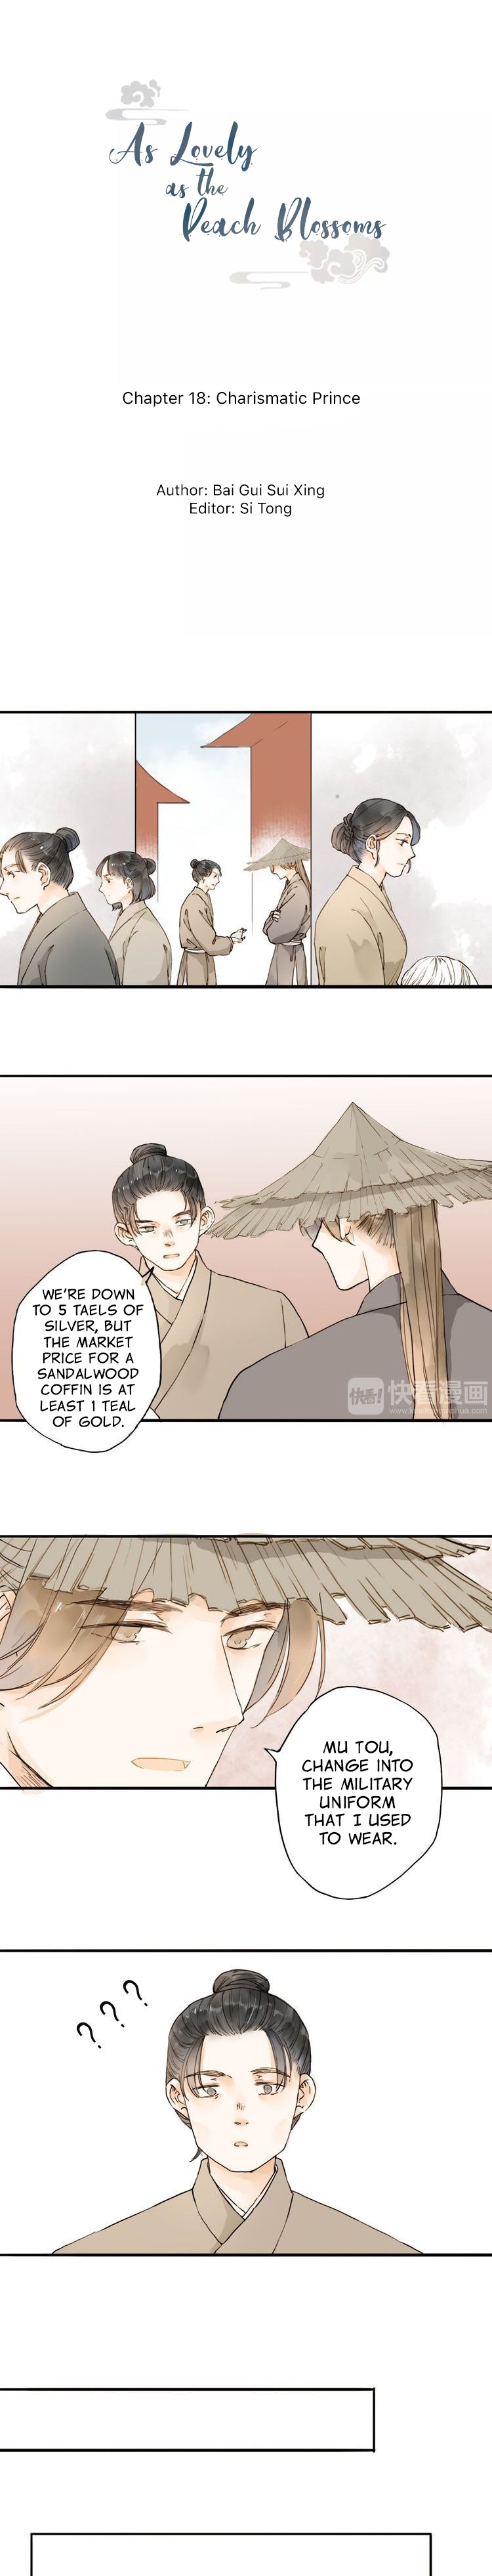 As Lovely as the Peach Blossoms chapter 18 - page 1